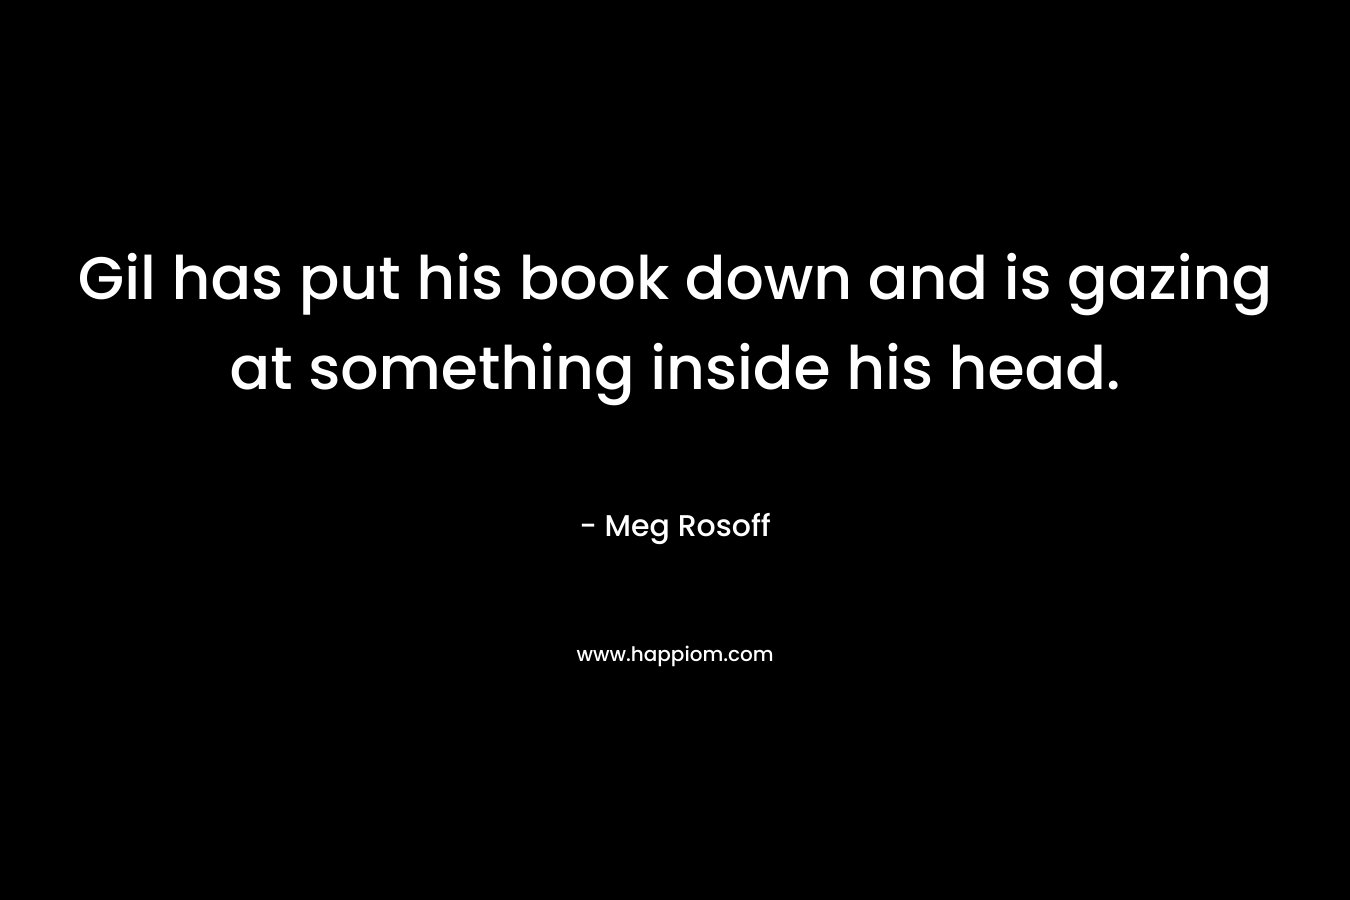 Gil has put his book down and is gazing at something inside his head. – Meg Rosoff